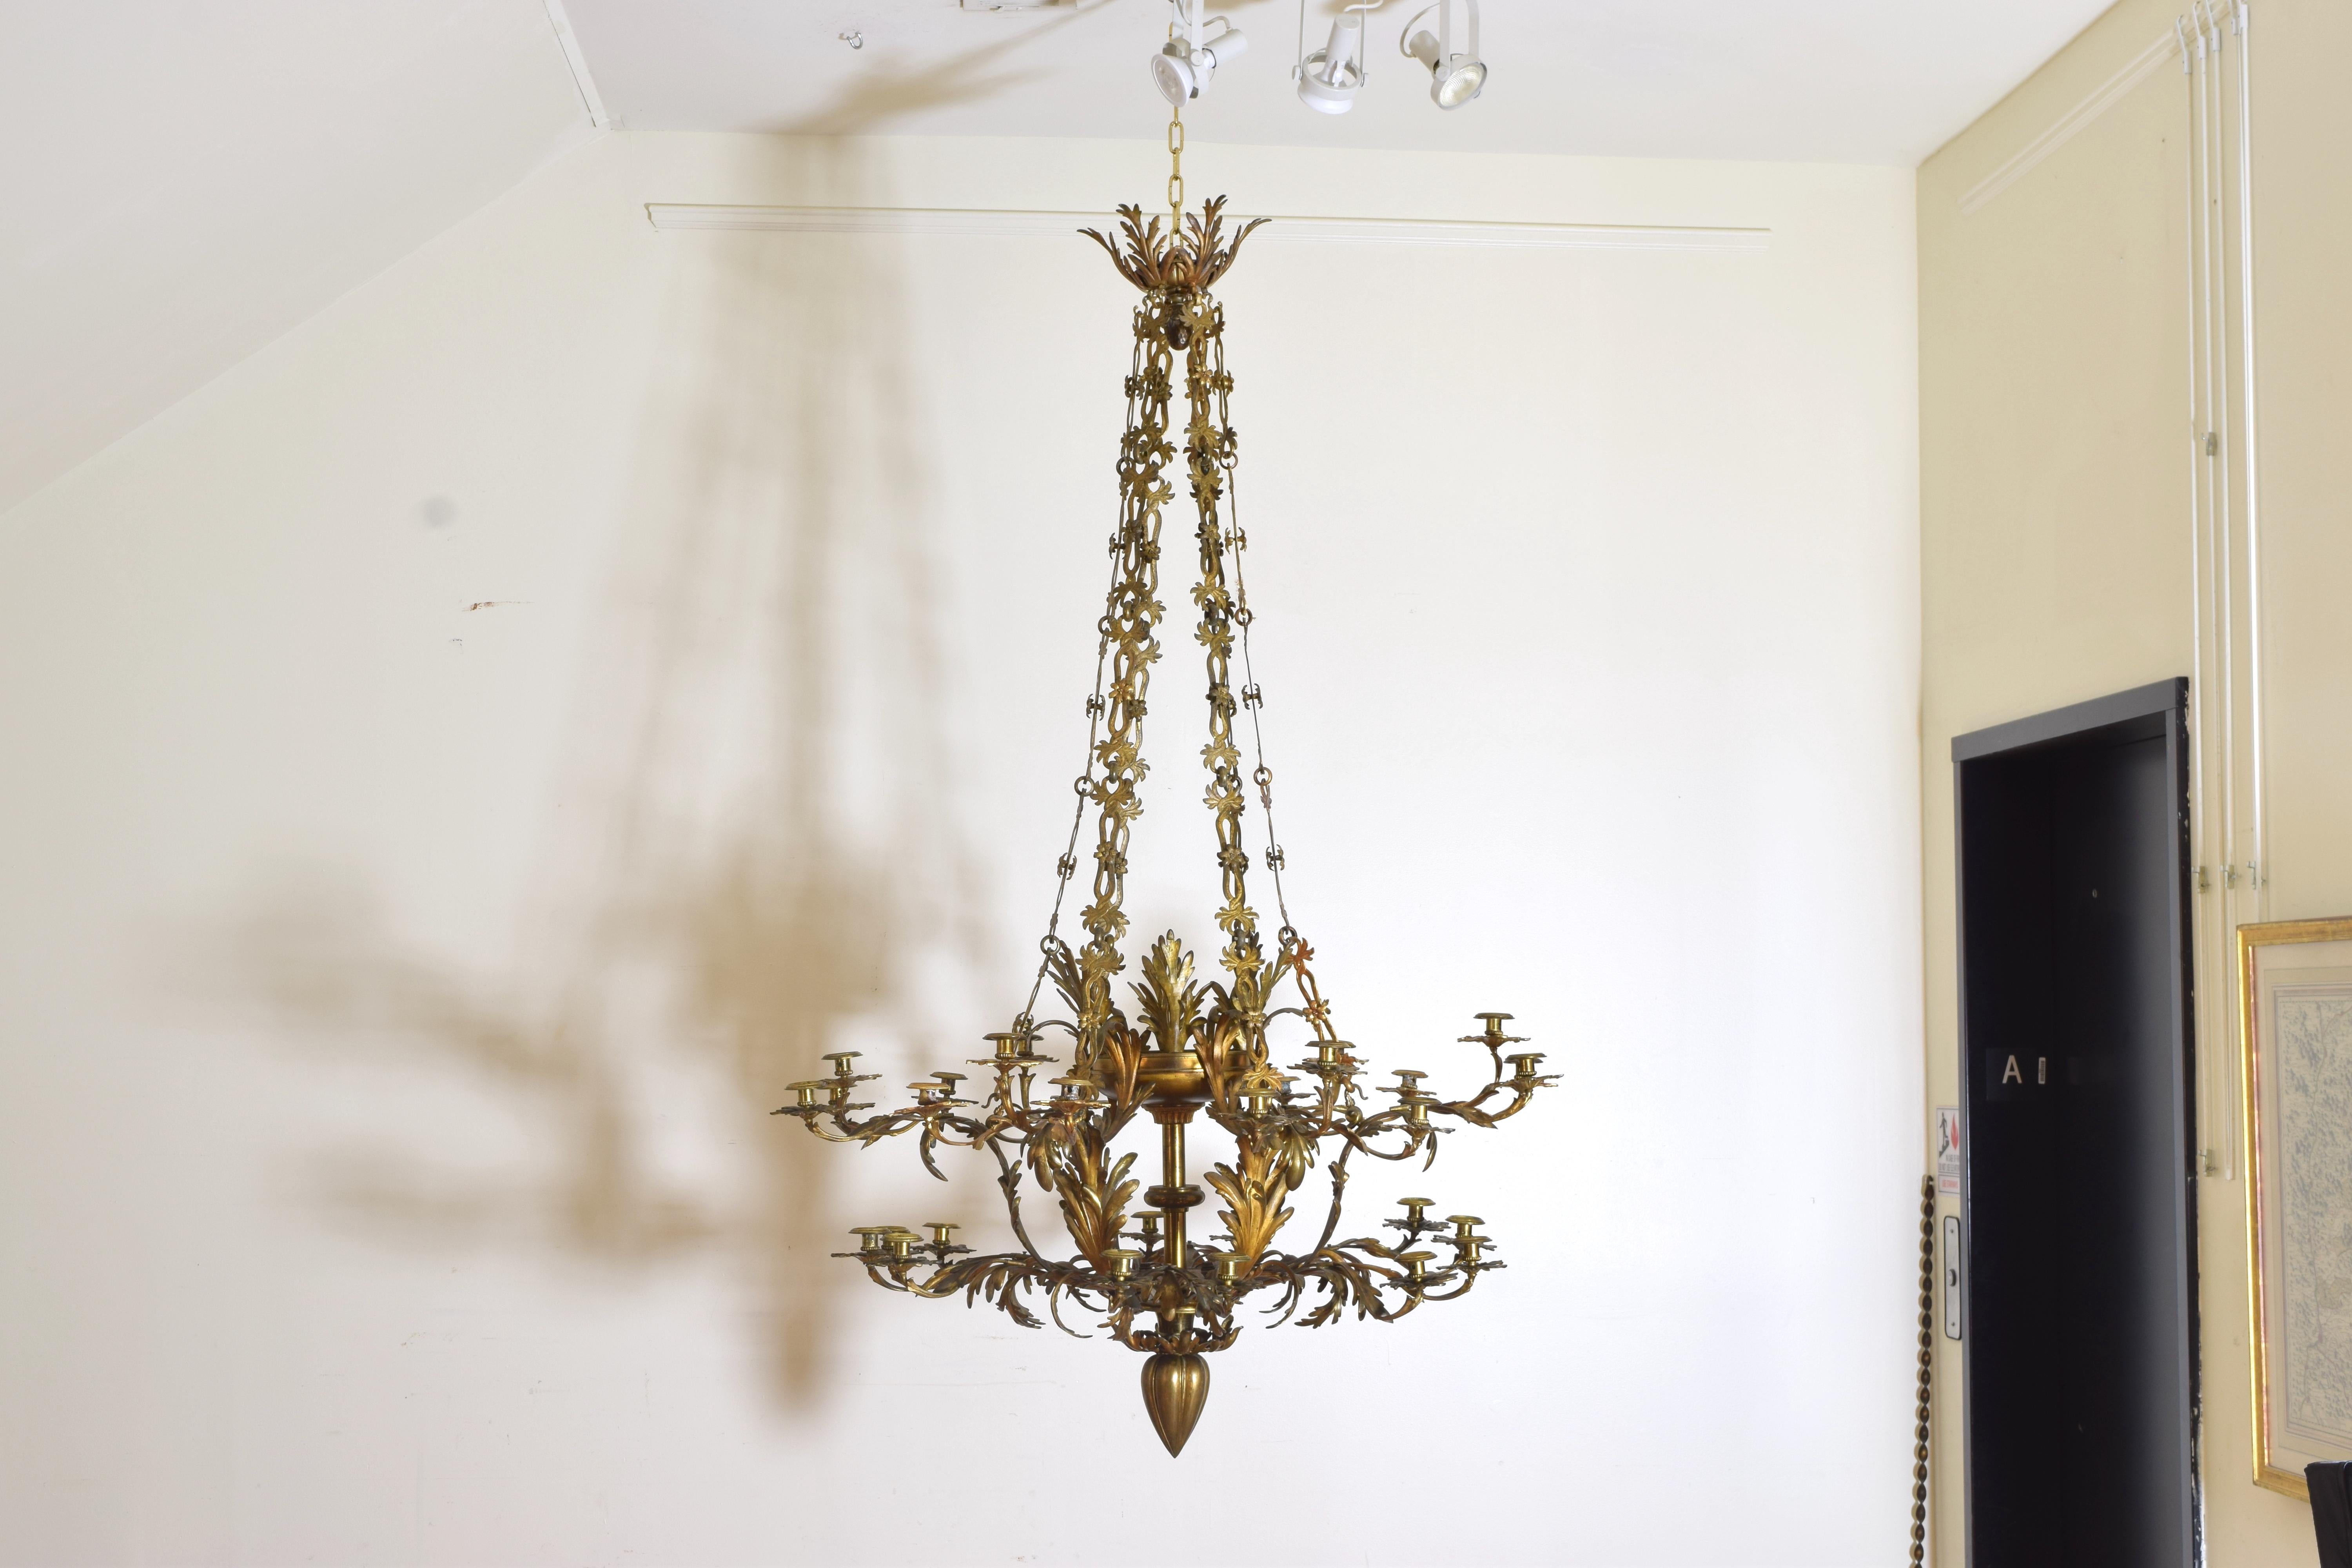 The chandelier is very likely from the boot of Italy, Lecce, which is also known as the Florence of the south. It has 30 lights on two different levels varying between two and three arms and an intricately detailed chain that leads from the body to